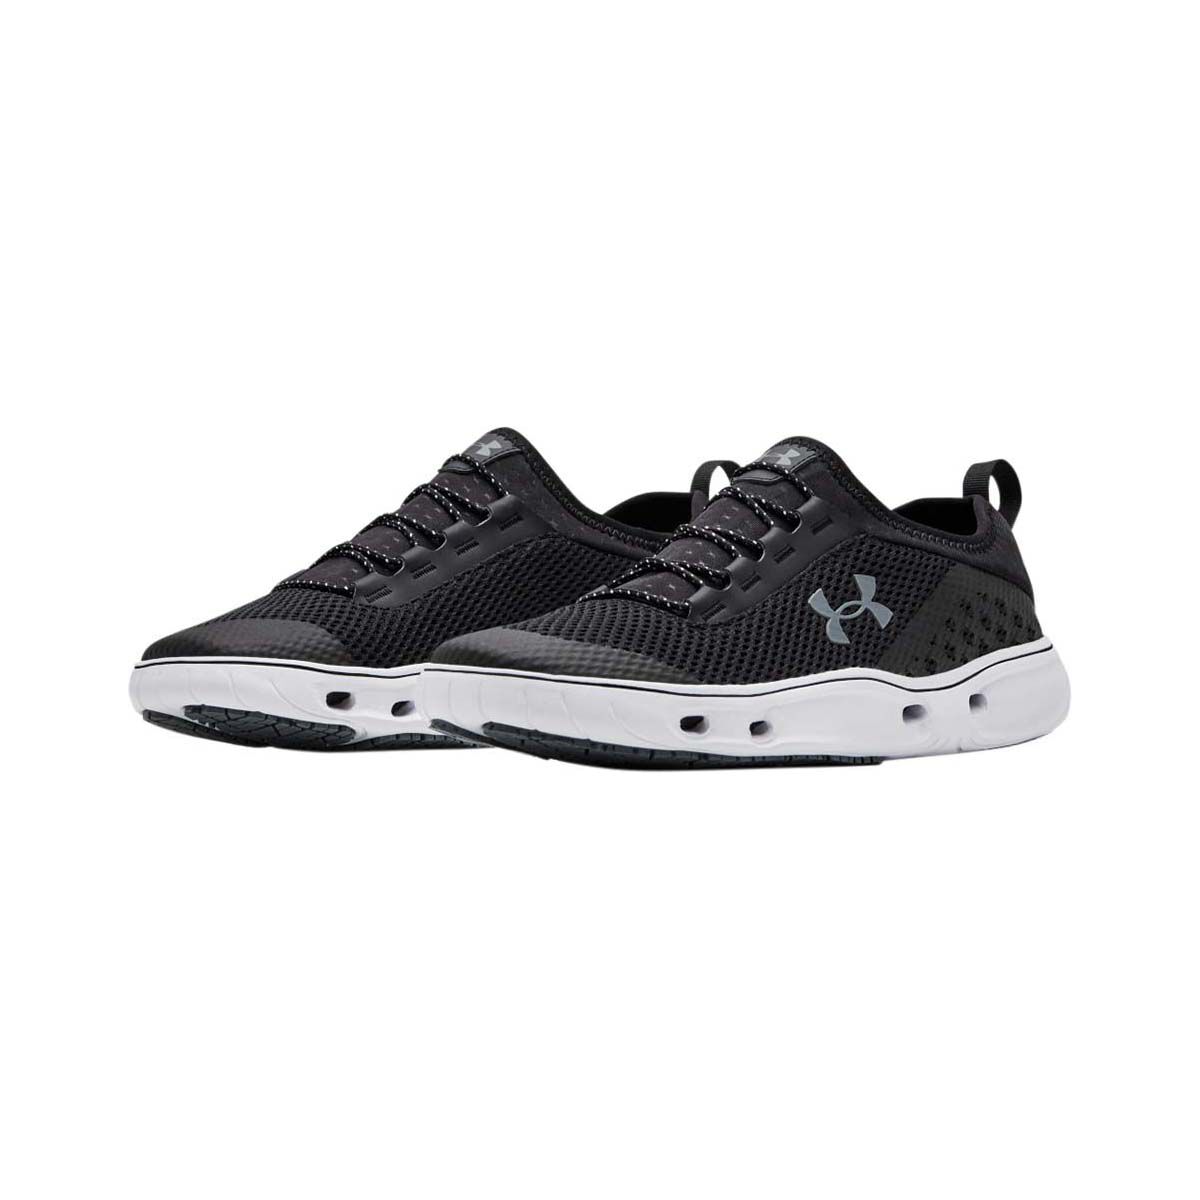 under armour shoes mens white